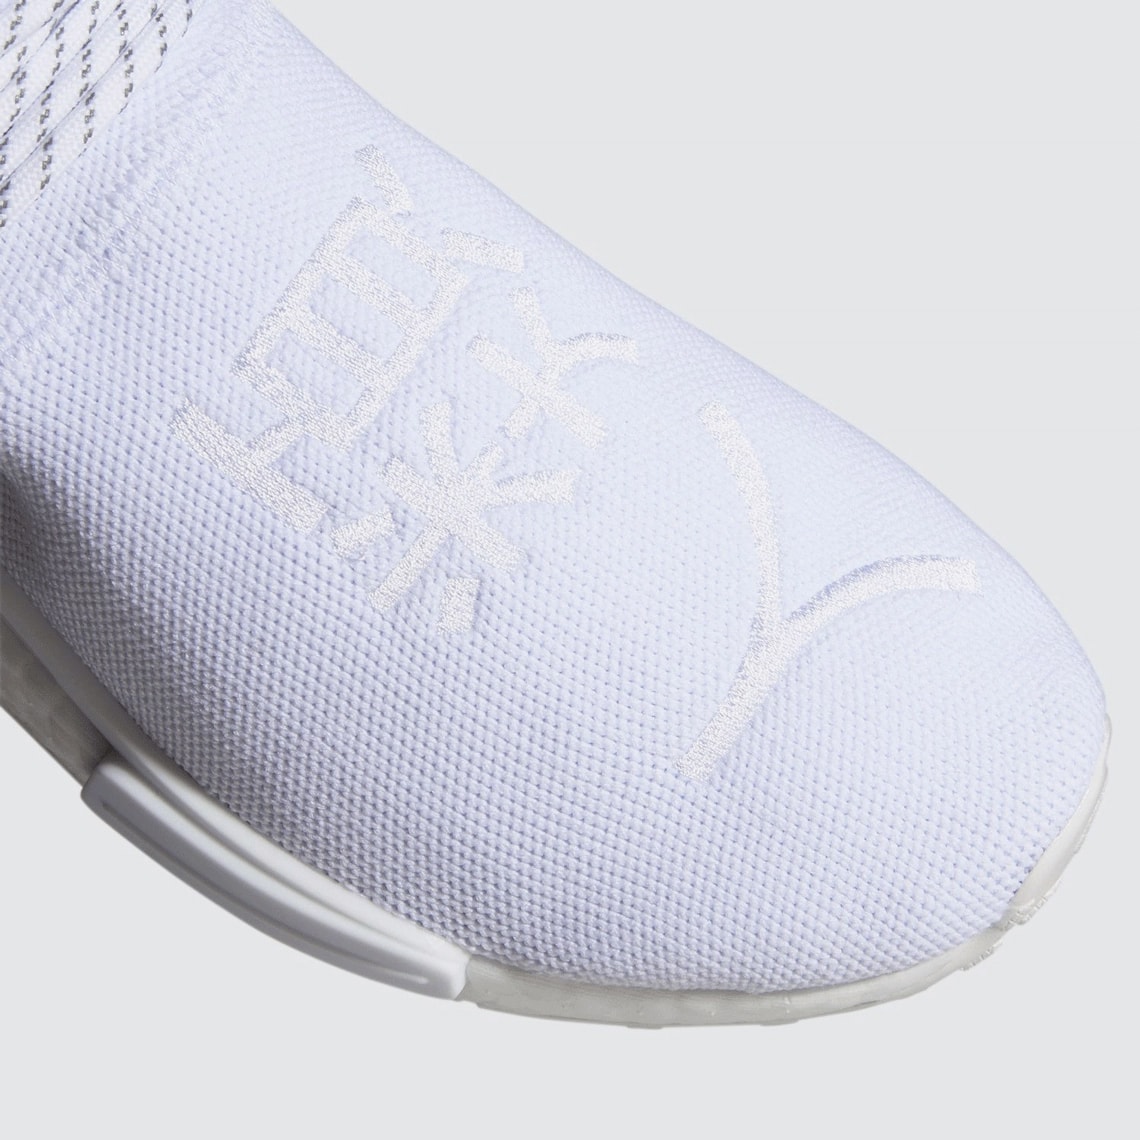 pharrell adidas originals nmd hu white black chinese characters gy0092 official release date info photos price store list buying guide